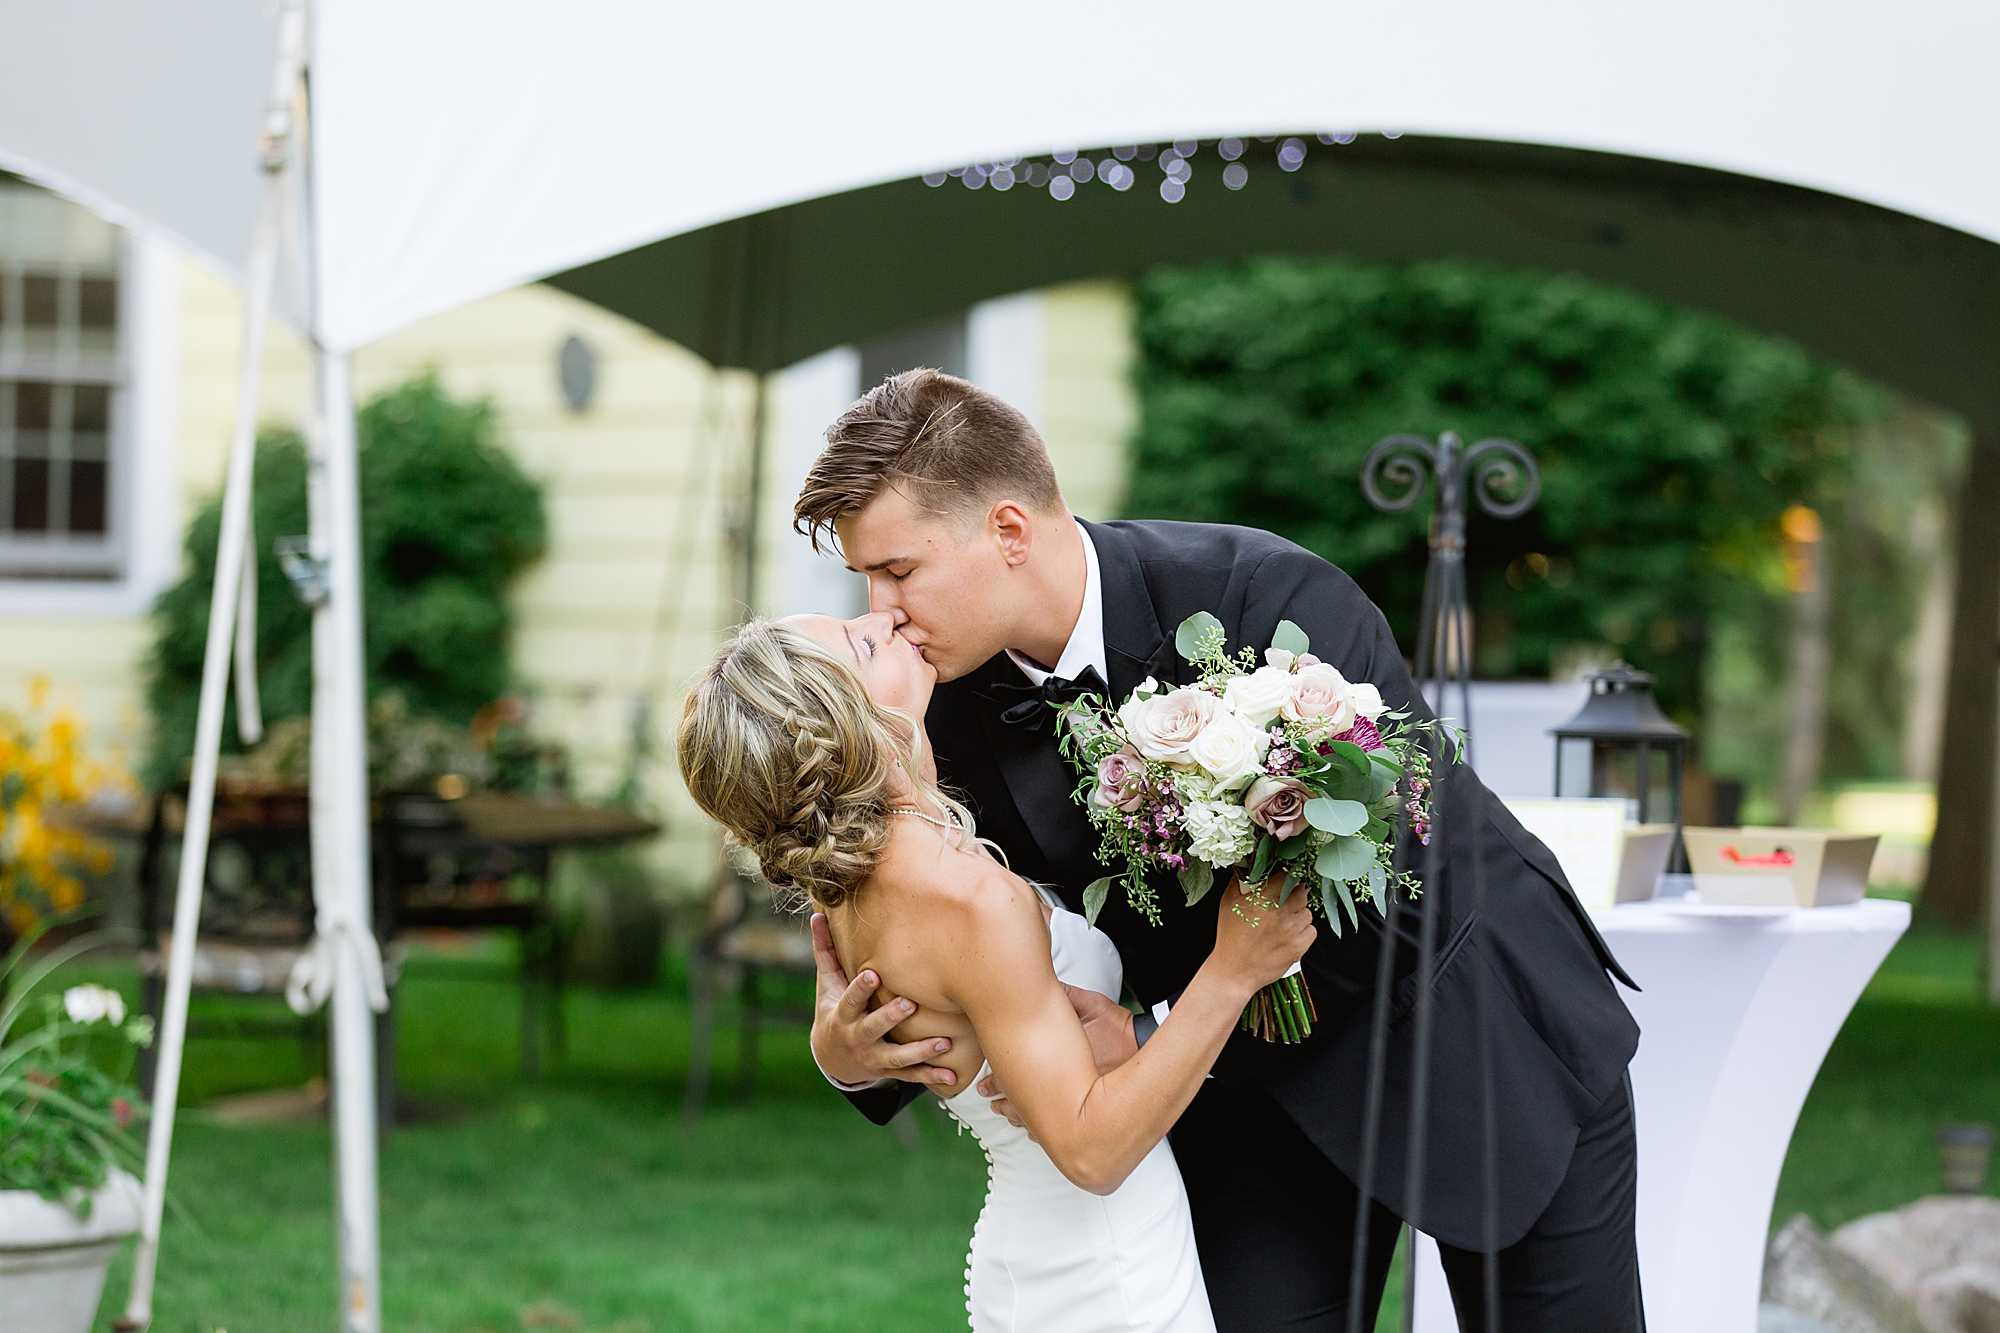 A classic late summer tented wedding at a family's private residence captured by Michigan wedding photographer Breanne Rochelle Photography.